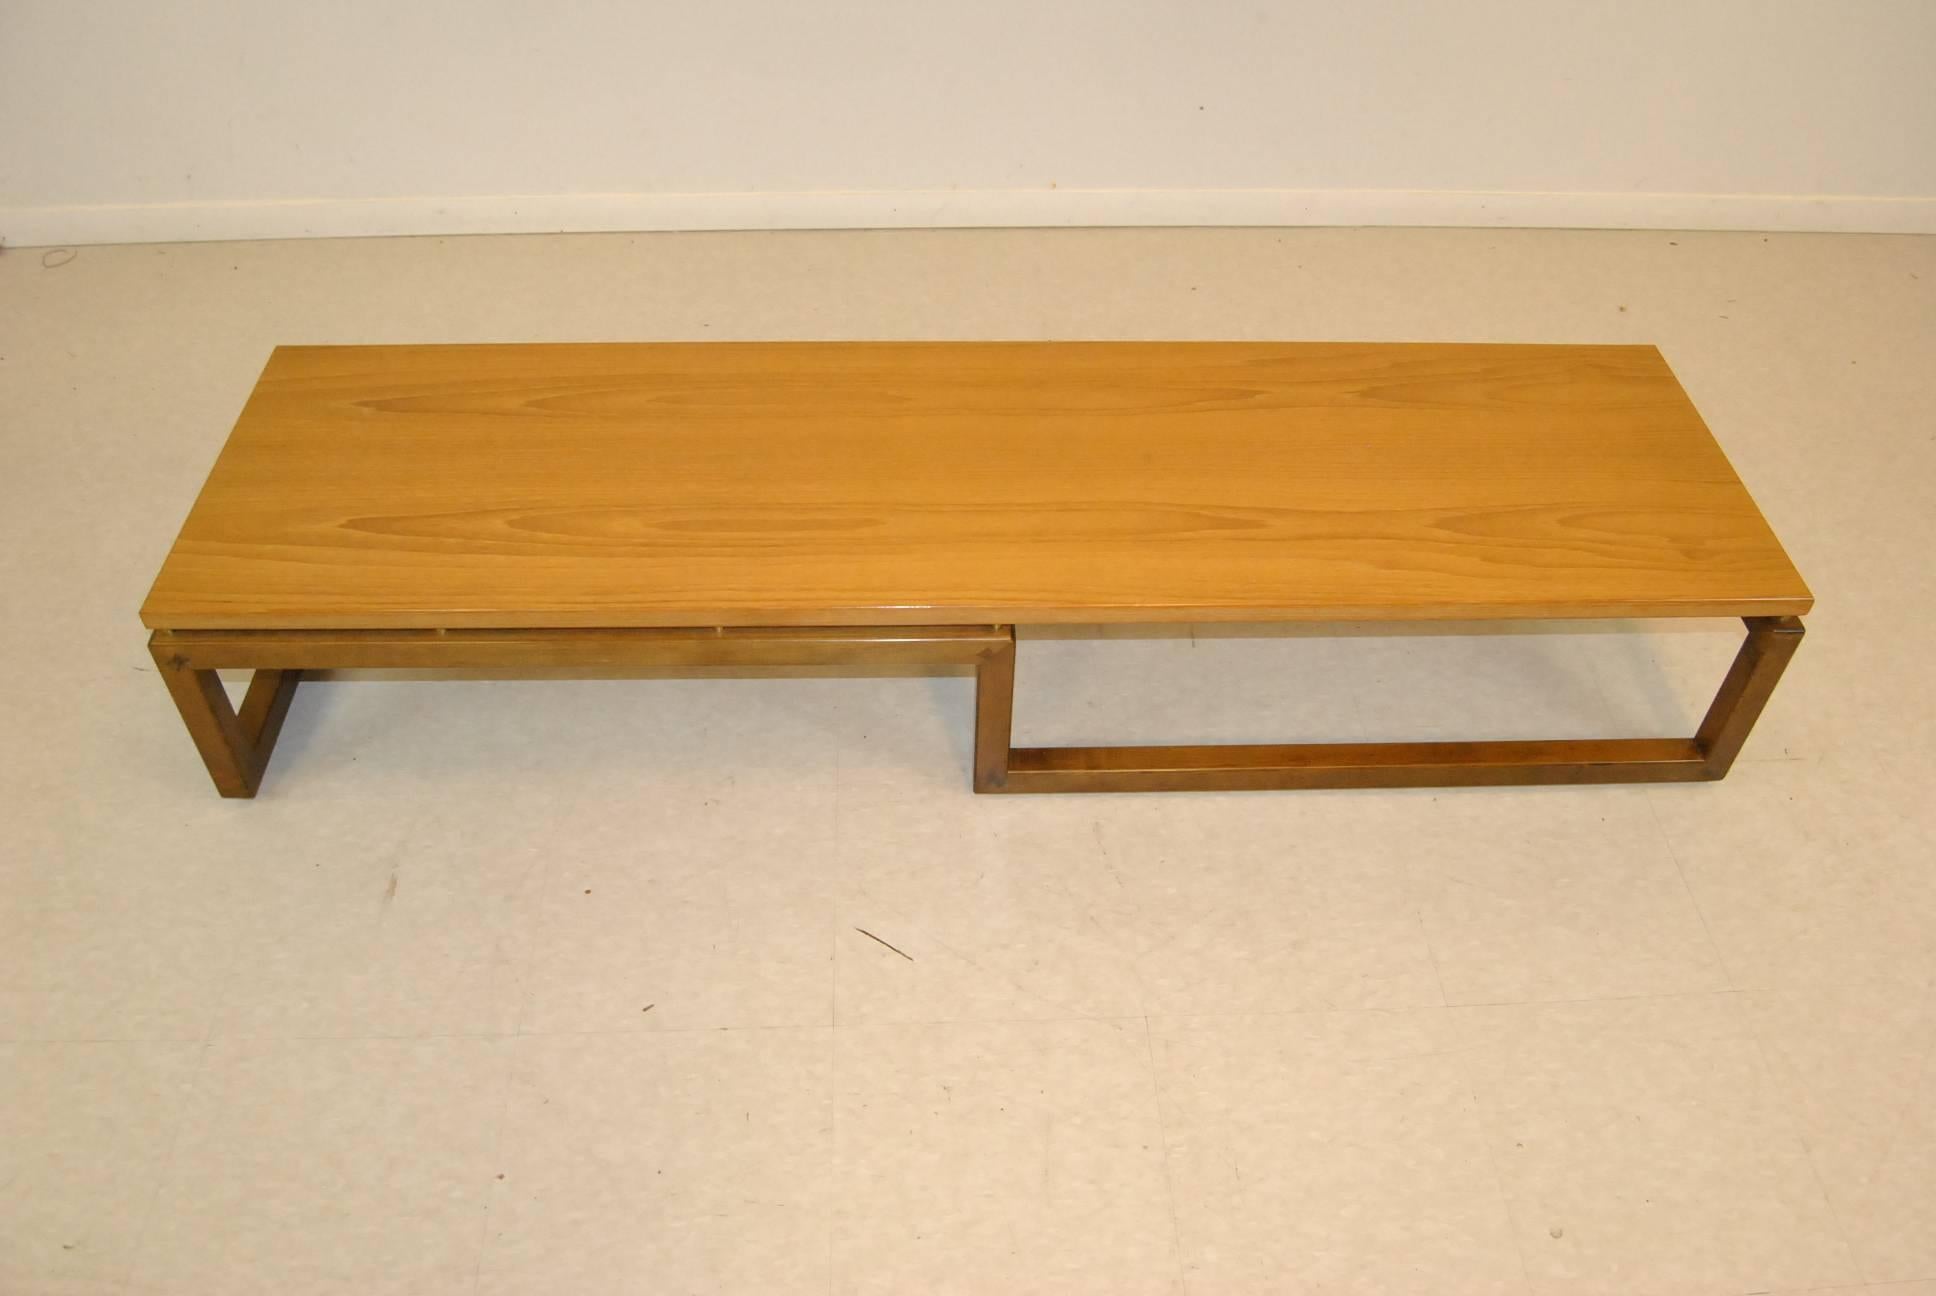 A great modern teak coffee table/bench by Michael Taylor for Baker Furniture. This table features an original finish, a floating top, straight lines with an inverted base. This great design is sure to add style to any room in your home. Very good